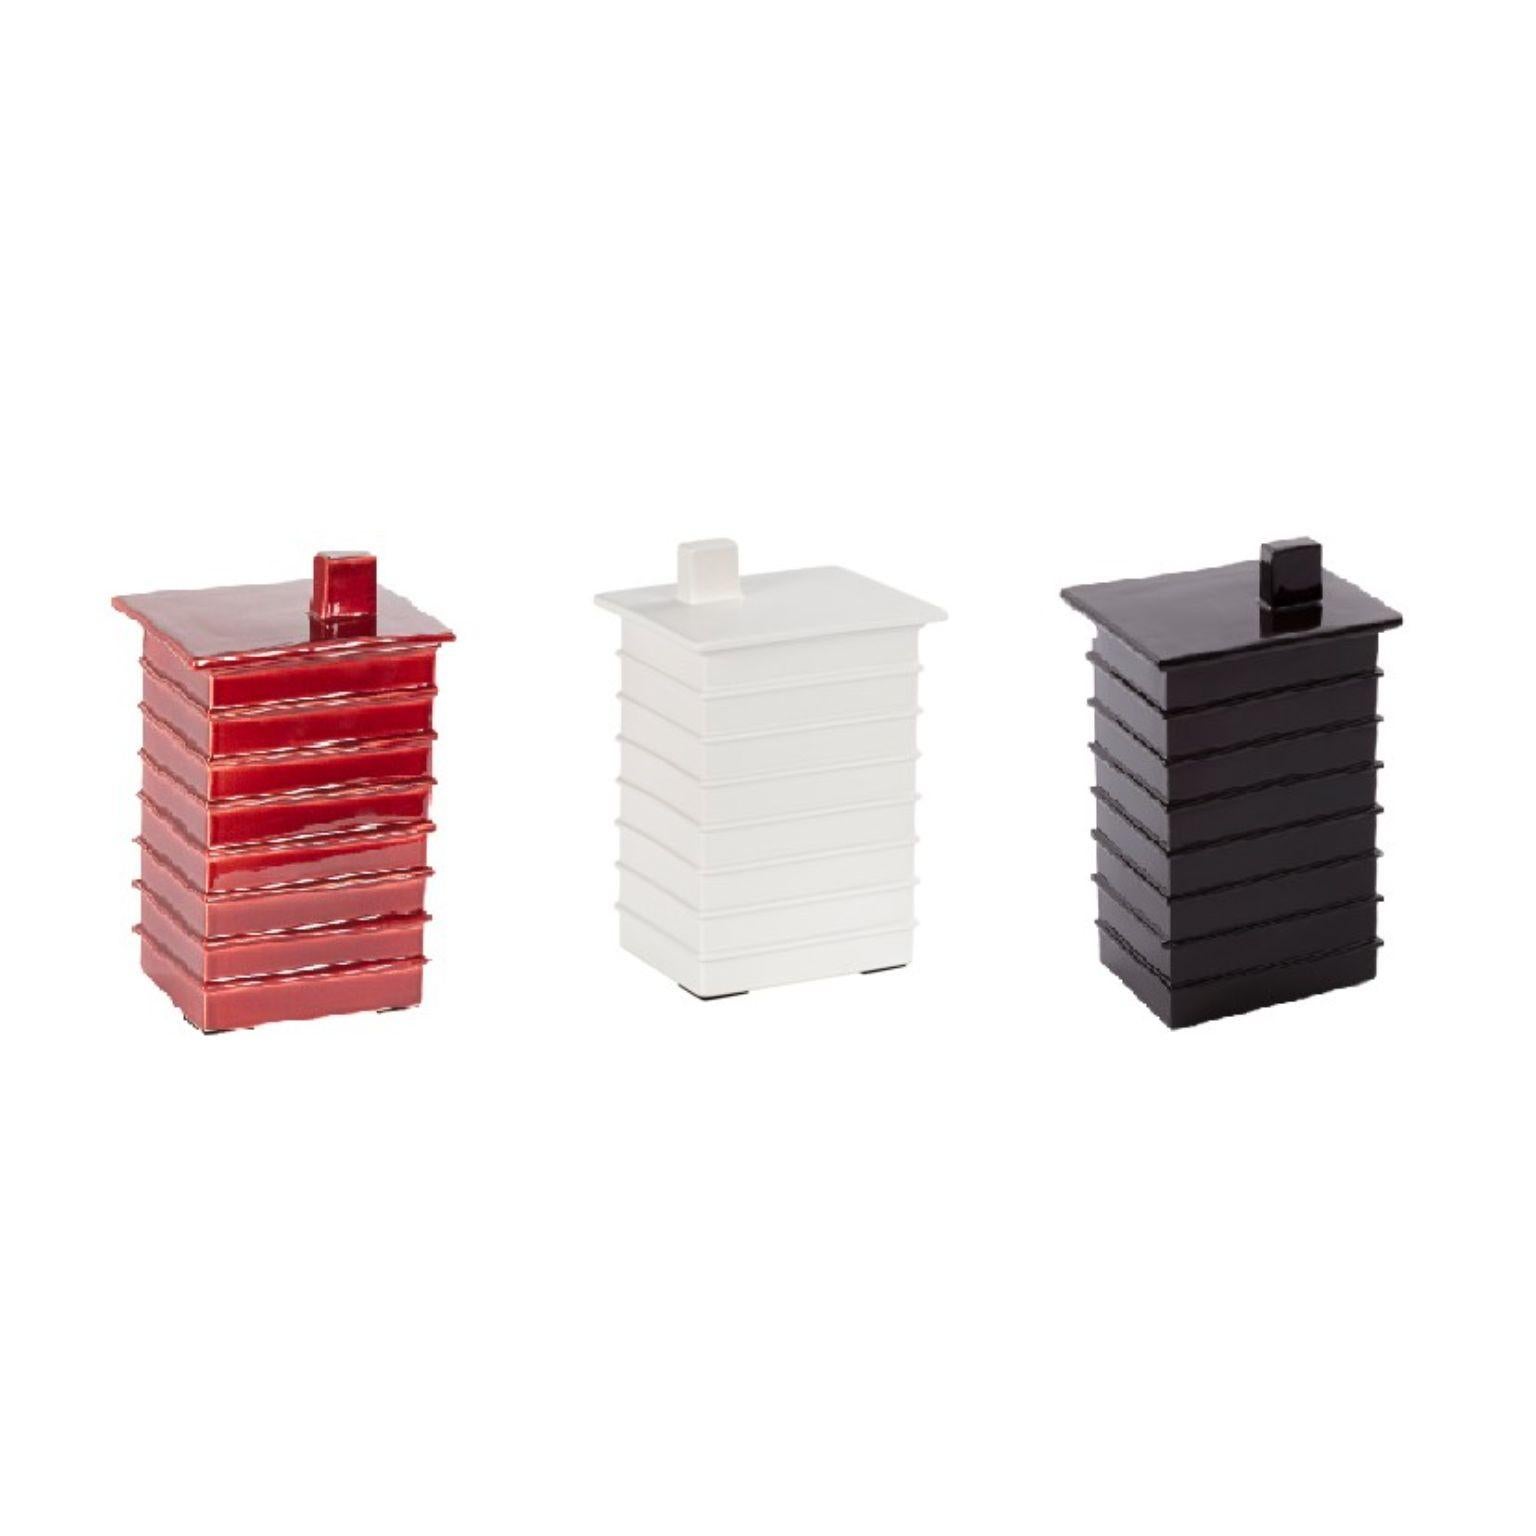 Set of 3 building small boxes by Pulpo
Dimensions: D14.5 x W11.5 x H23.5 cm
Materials: ceramic

Also available in different colours. 

This building boxes bring to mind the industrial areas so familiar within our urban landscapes. An